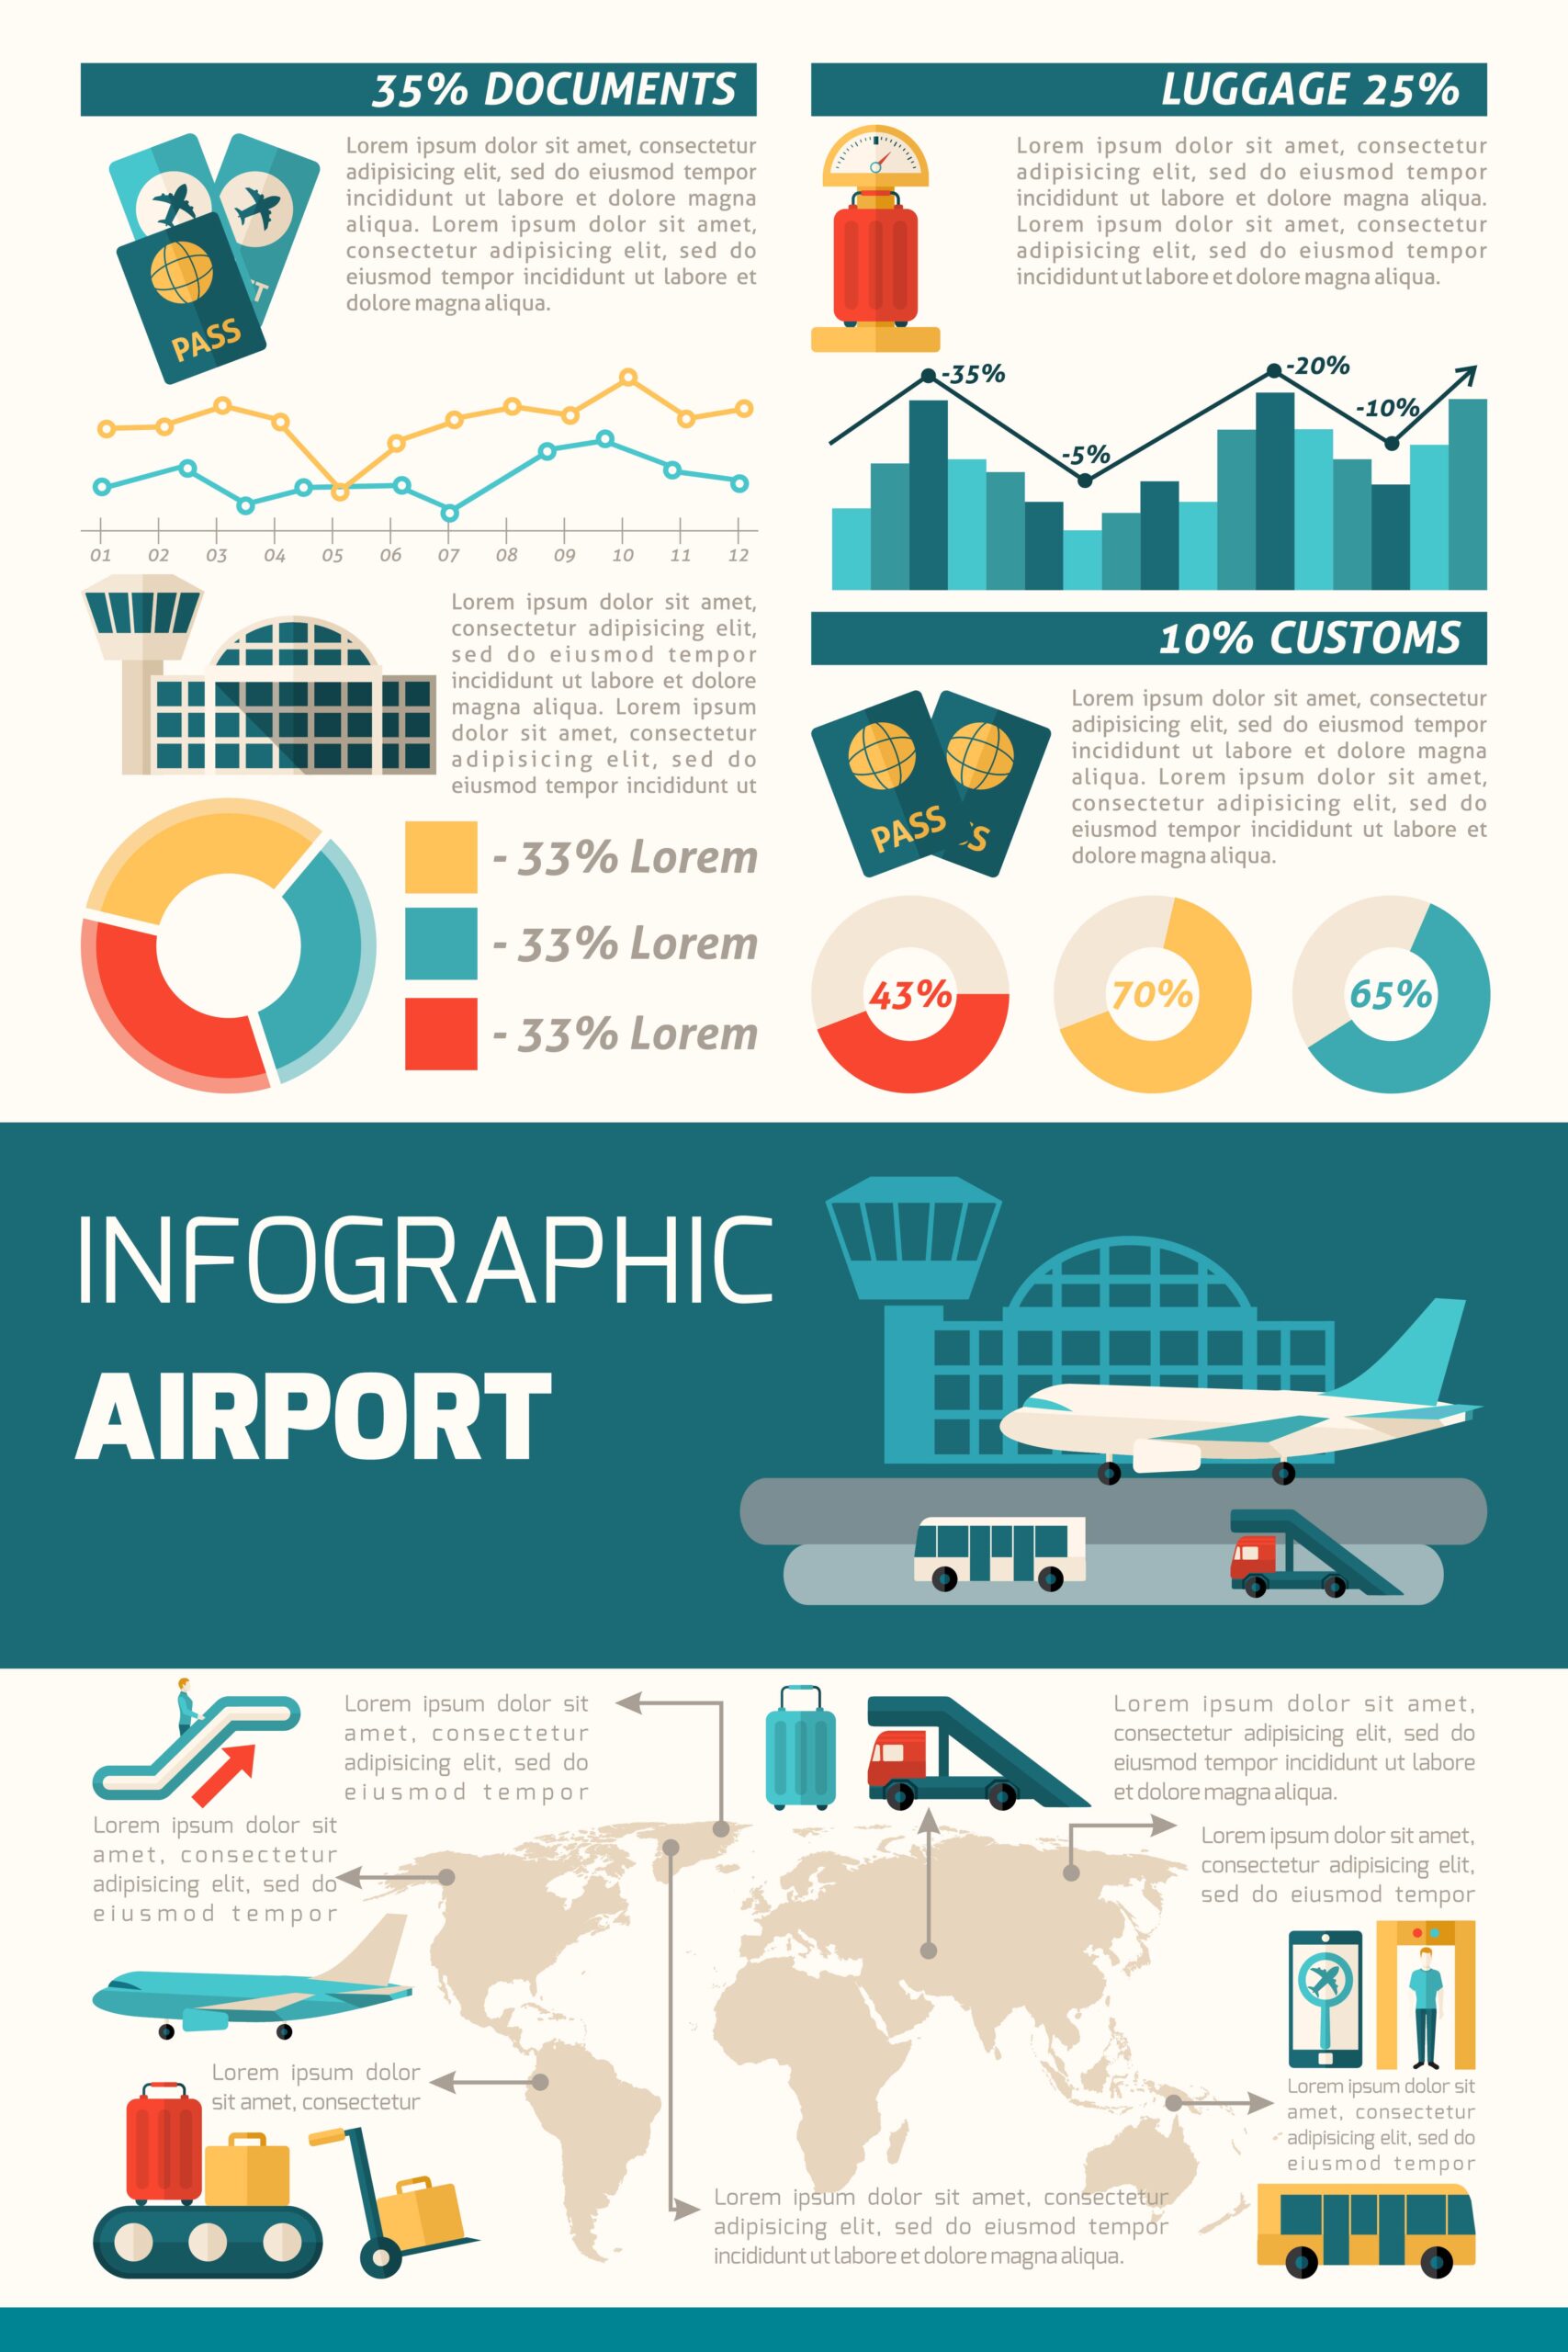 b"How to Make an Infographic with Easellys Free Infographic Maker"